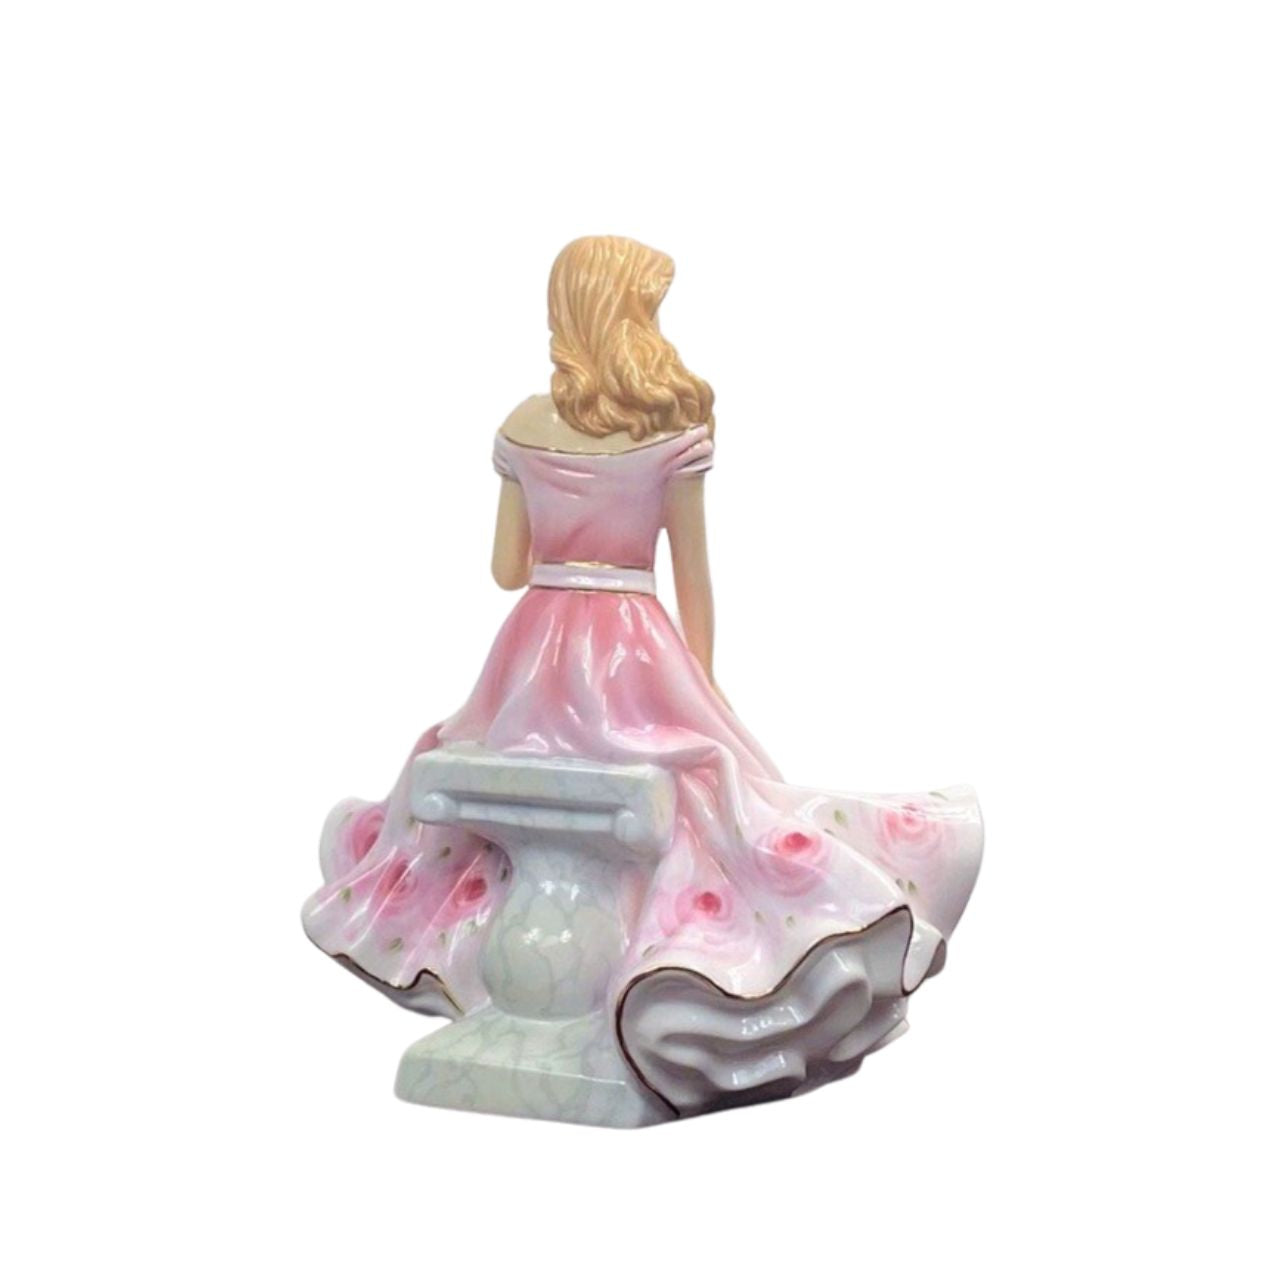 Royal Doulton Rose British Flower Ladies Limited Edition Figurine  No.6 of 350  At one with nature & captured in a moment of quiet contemplation seated atop a marble plinth. This angelic lady, attired in a dress of subtle pink tones and wonderfully complemented with marvellously decorated roses at its hem, is lost in the romance held within the lines of a poem whilst sharing her thoughts in the company of a passing butterfly.